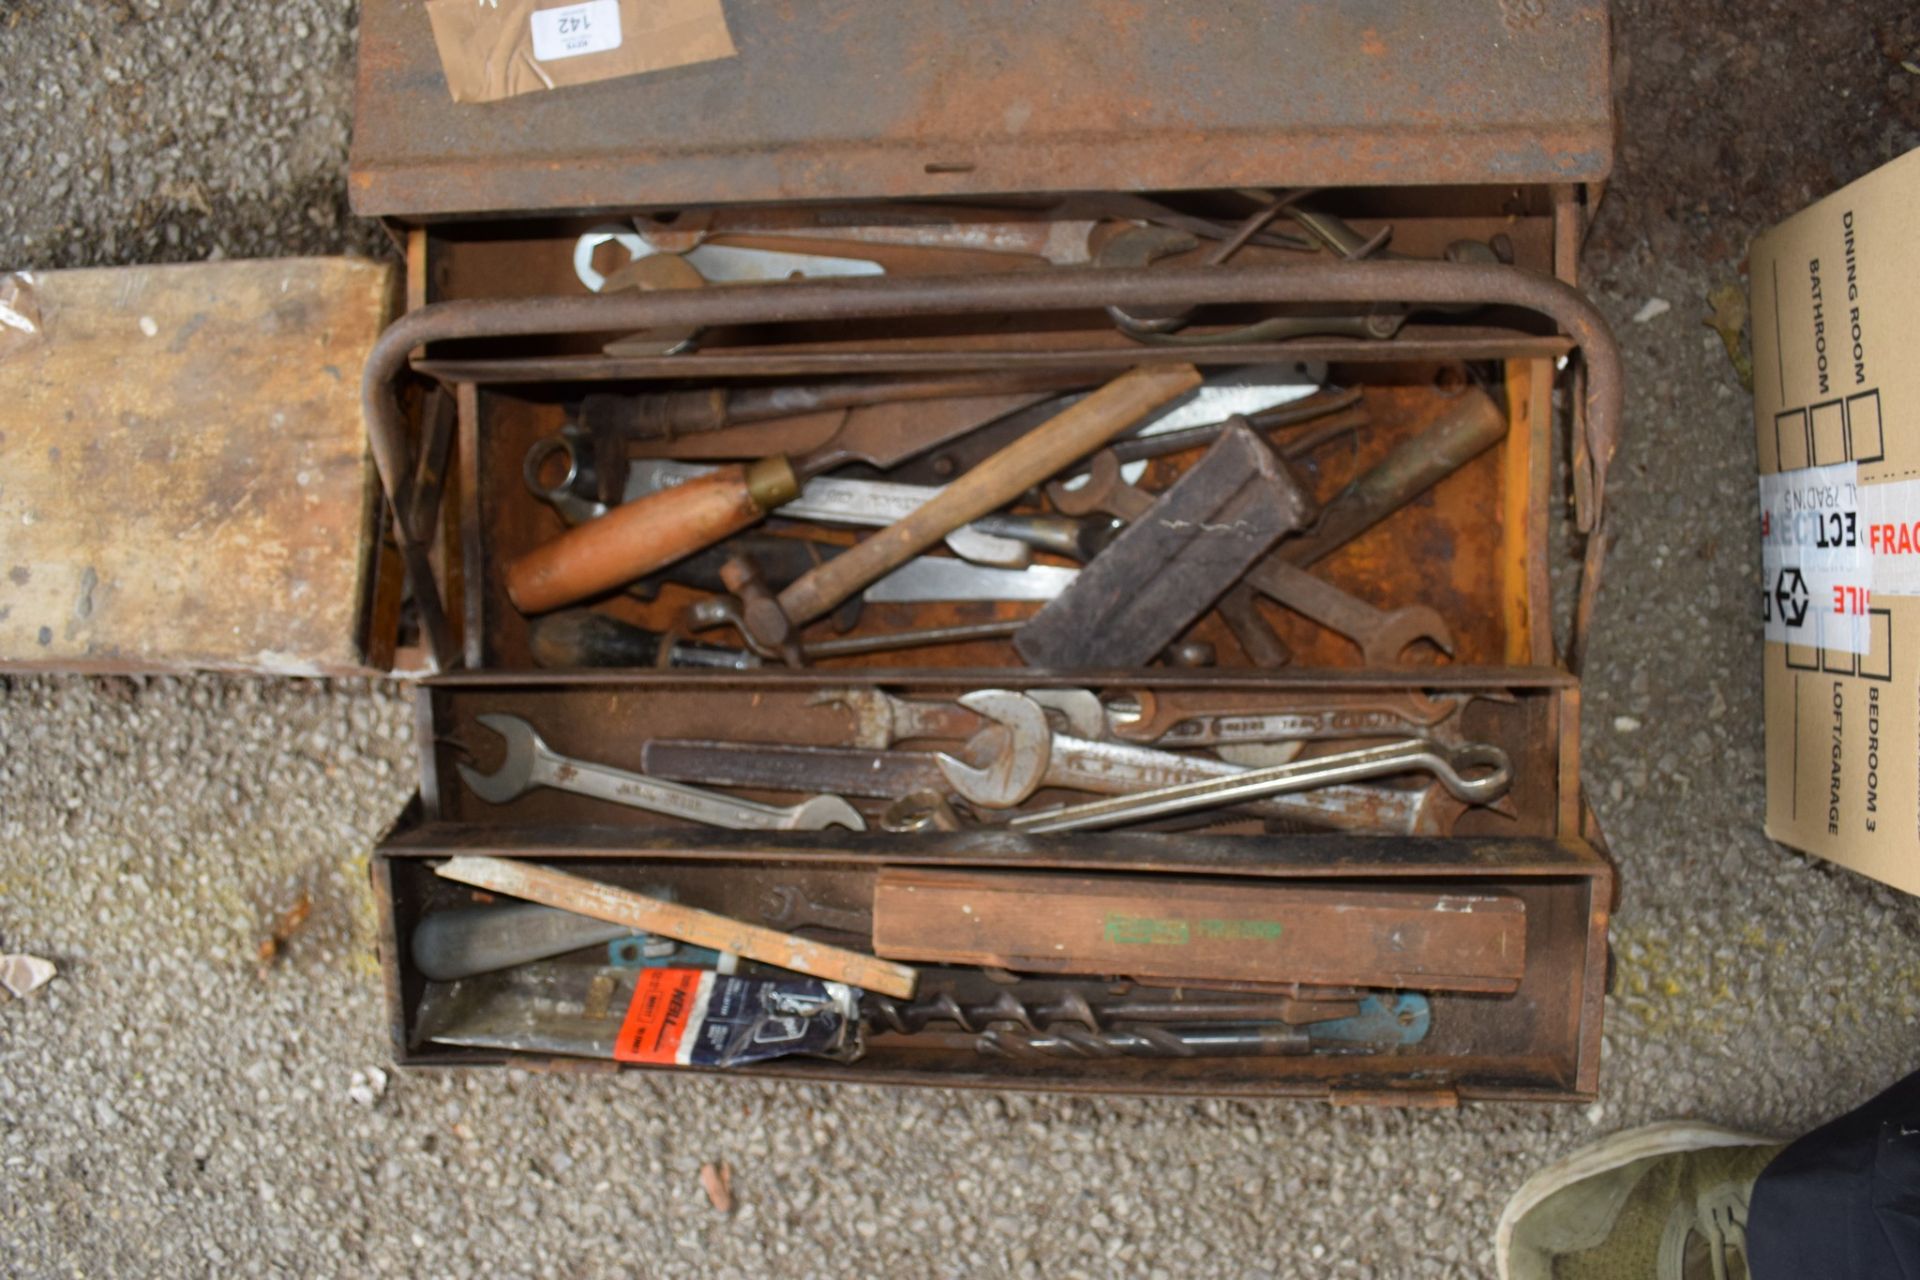 METAL CANTILEVER TOOLBOX AND CONTENTS TO INCLUDE VARIOUS DRILL BITS, TOOLS ETC